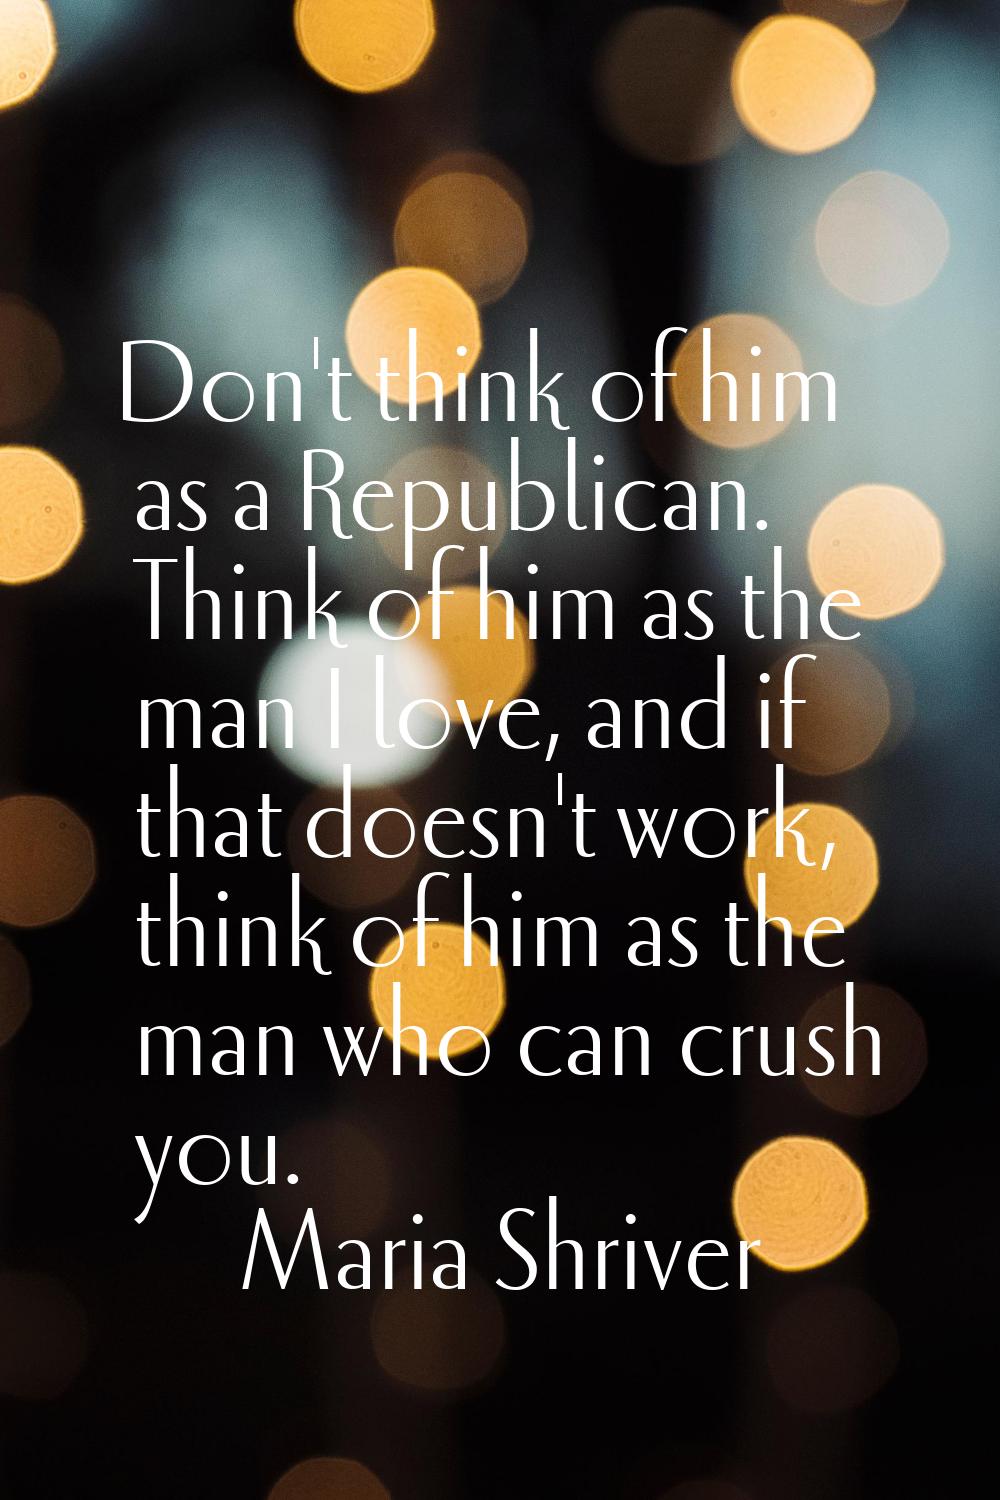 Don't think of him as a Republican. Think of him as the man I love, and if that doesn't work, think